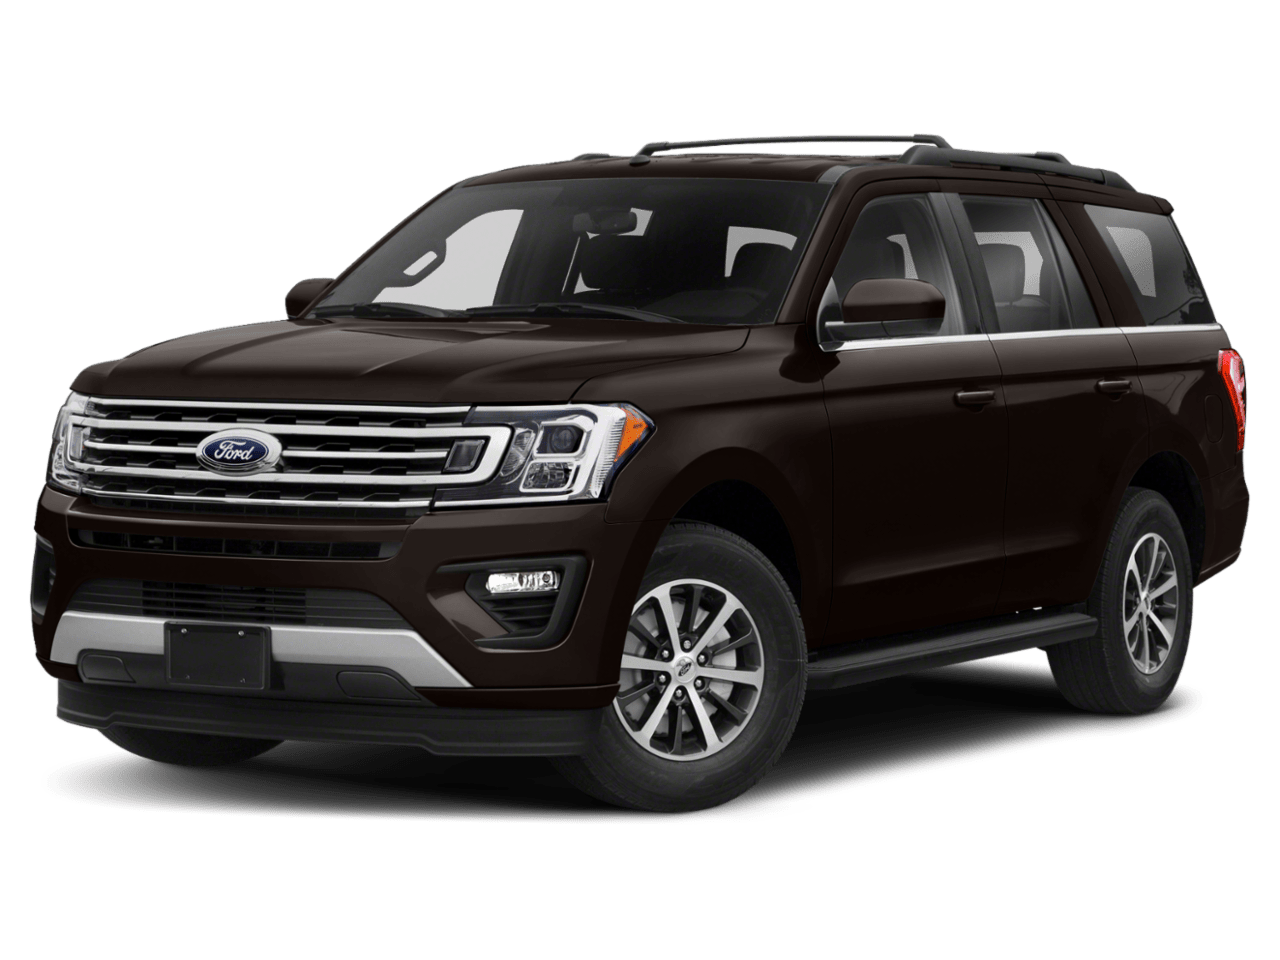 2021 Ford Expedition Model